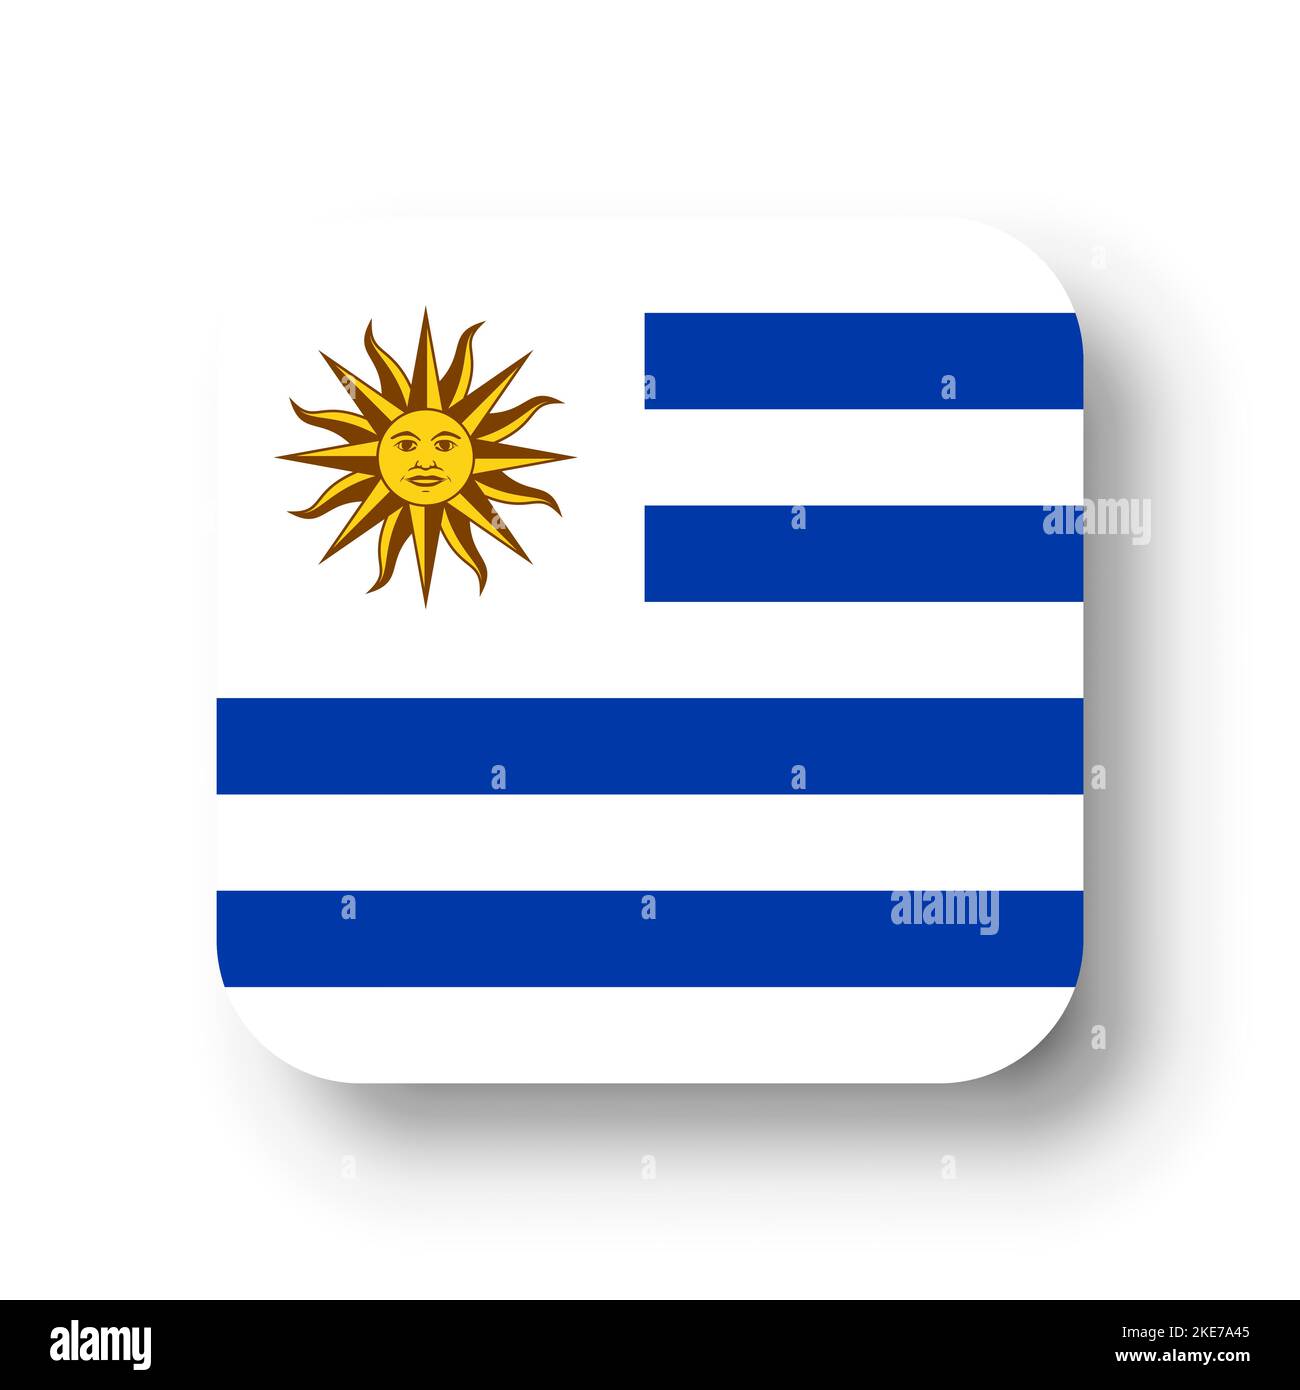 Canillo , Andorra - 9 abril 2020 - the logo of Club Nacional de football of  Montevideo, Uruguay on an official jersey on april 09 , 2010 in Canillo  Stock Photo - Alamy